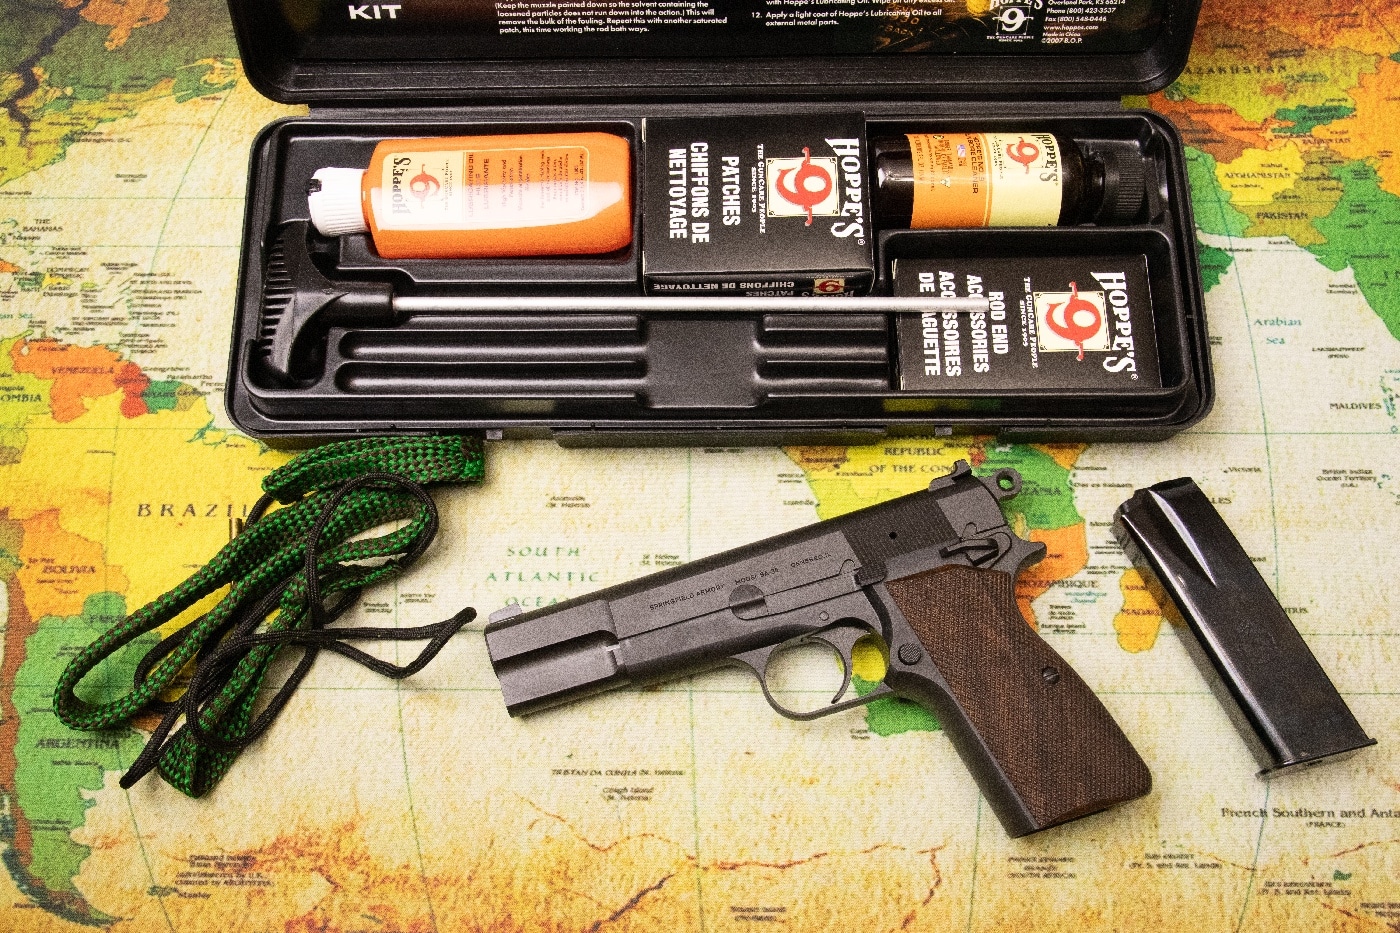 In this full color photograph we see a Springfield sa-35 9mm semi-automatic pistol with a Hoppe's cleaning kit. The gun and the kit are sitting on a large cleaning map that has a political map of the Earth on it. The sa-35 is based on the original P-35 handgun designed by John Moses Browning. The gun is better known as the Browning Hi Power. It is a single-action firearm that many people say is superior to the M1911A1.